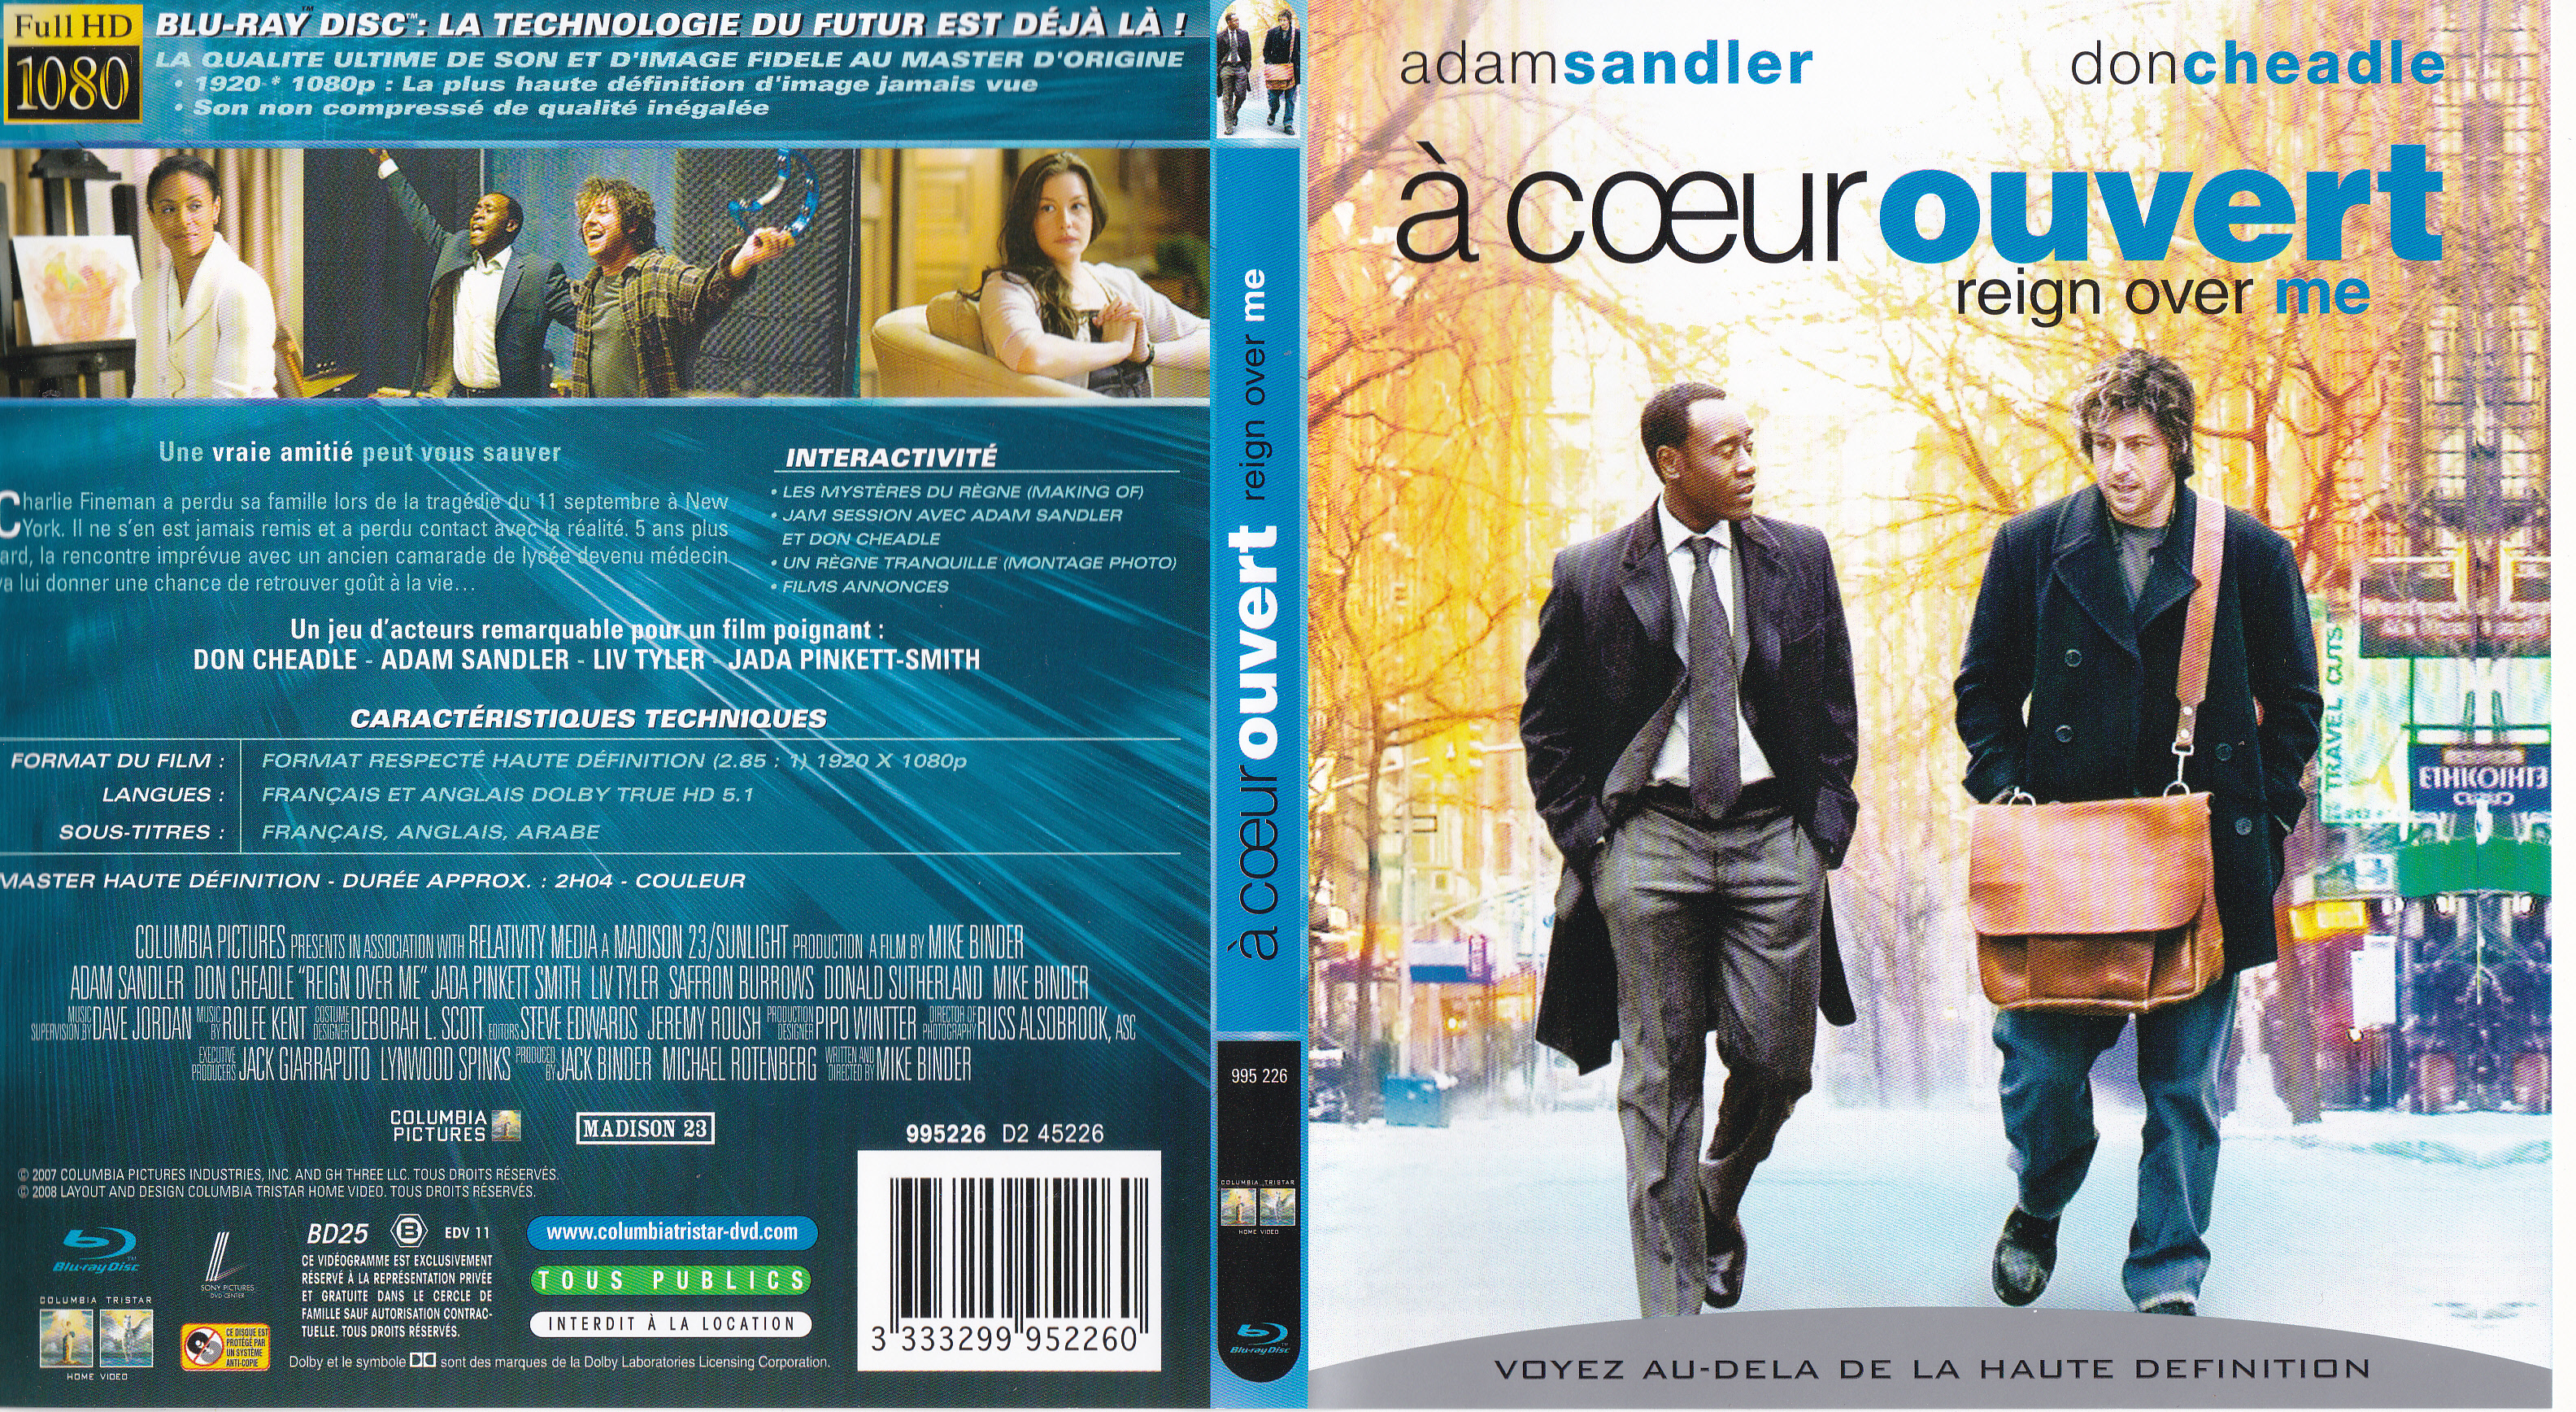 Jaquette DVD A coeur ouvert (2012) (BLU-RAY)